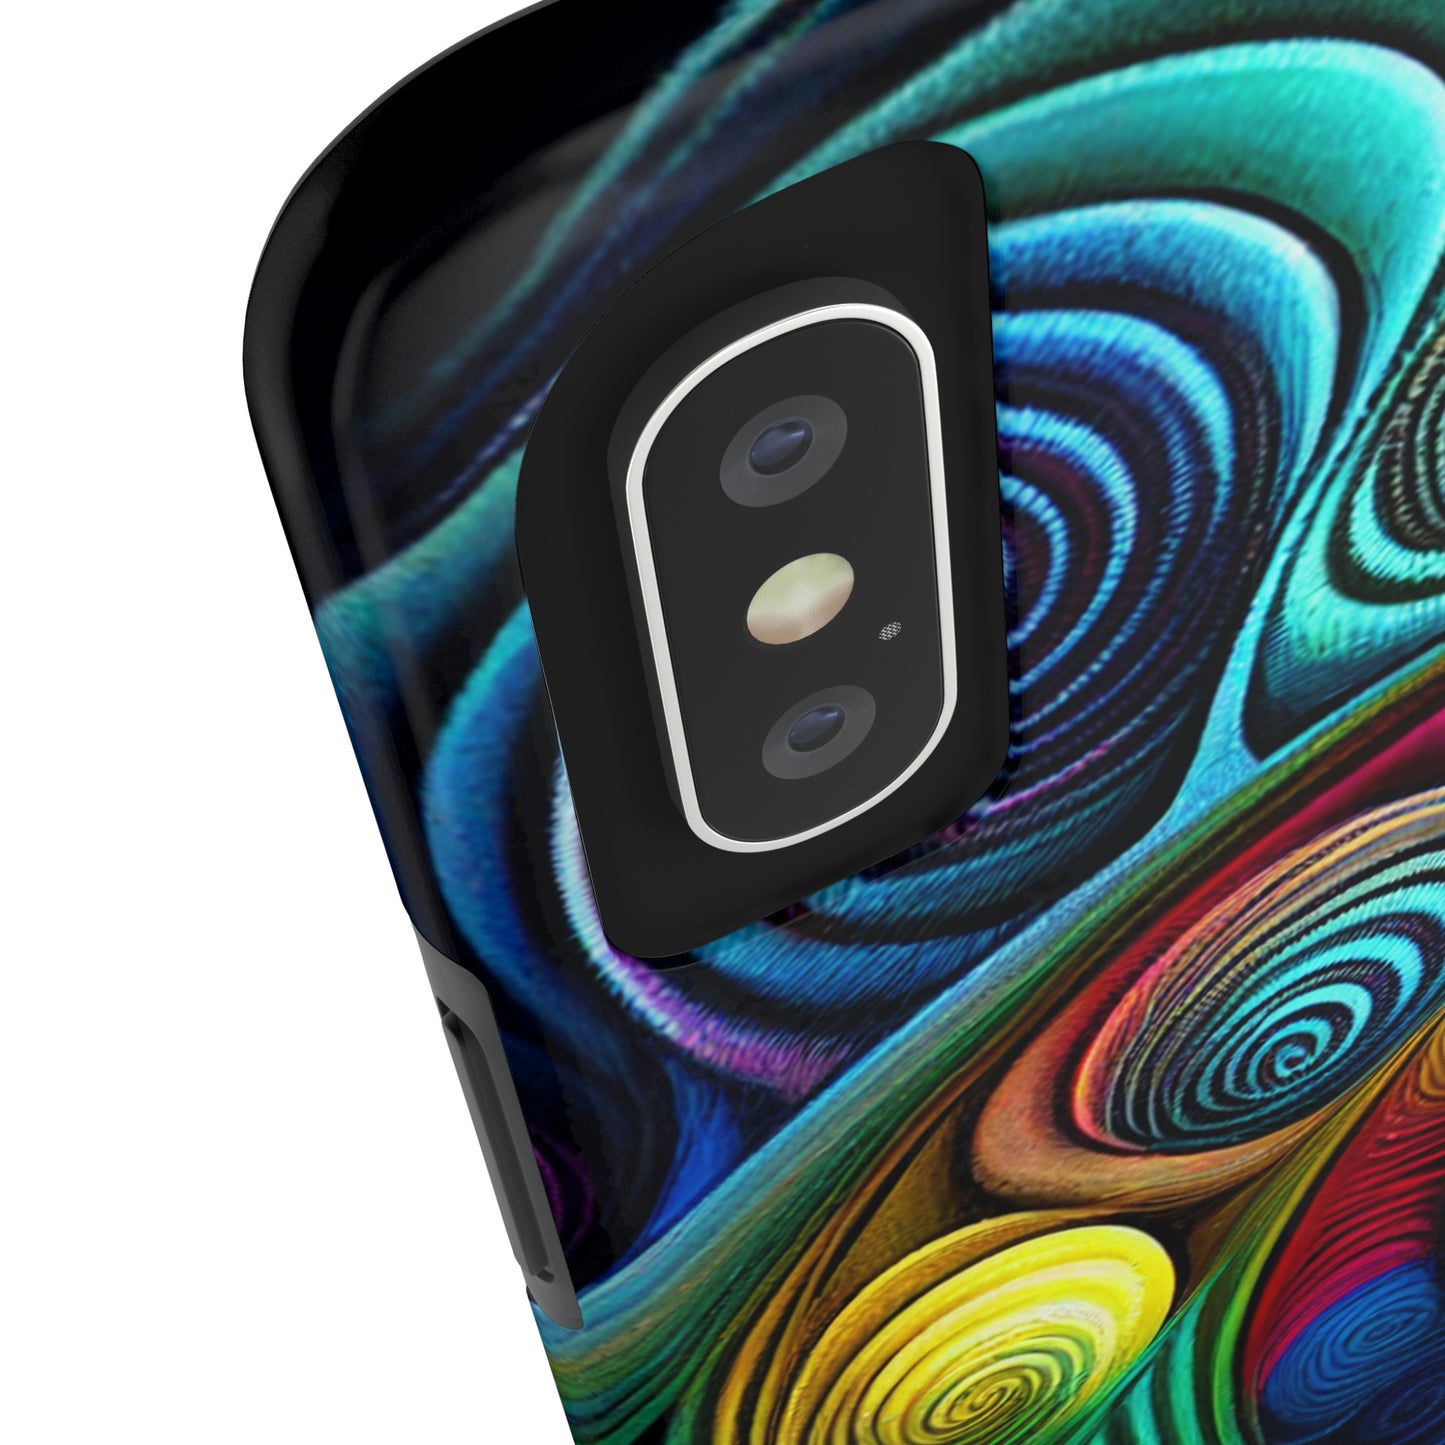 Spiraling Psychedelic Phone Case